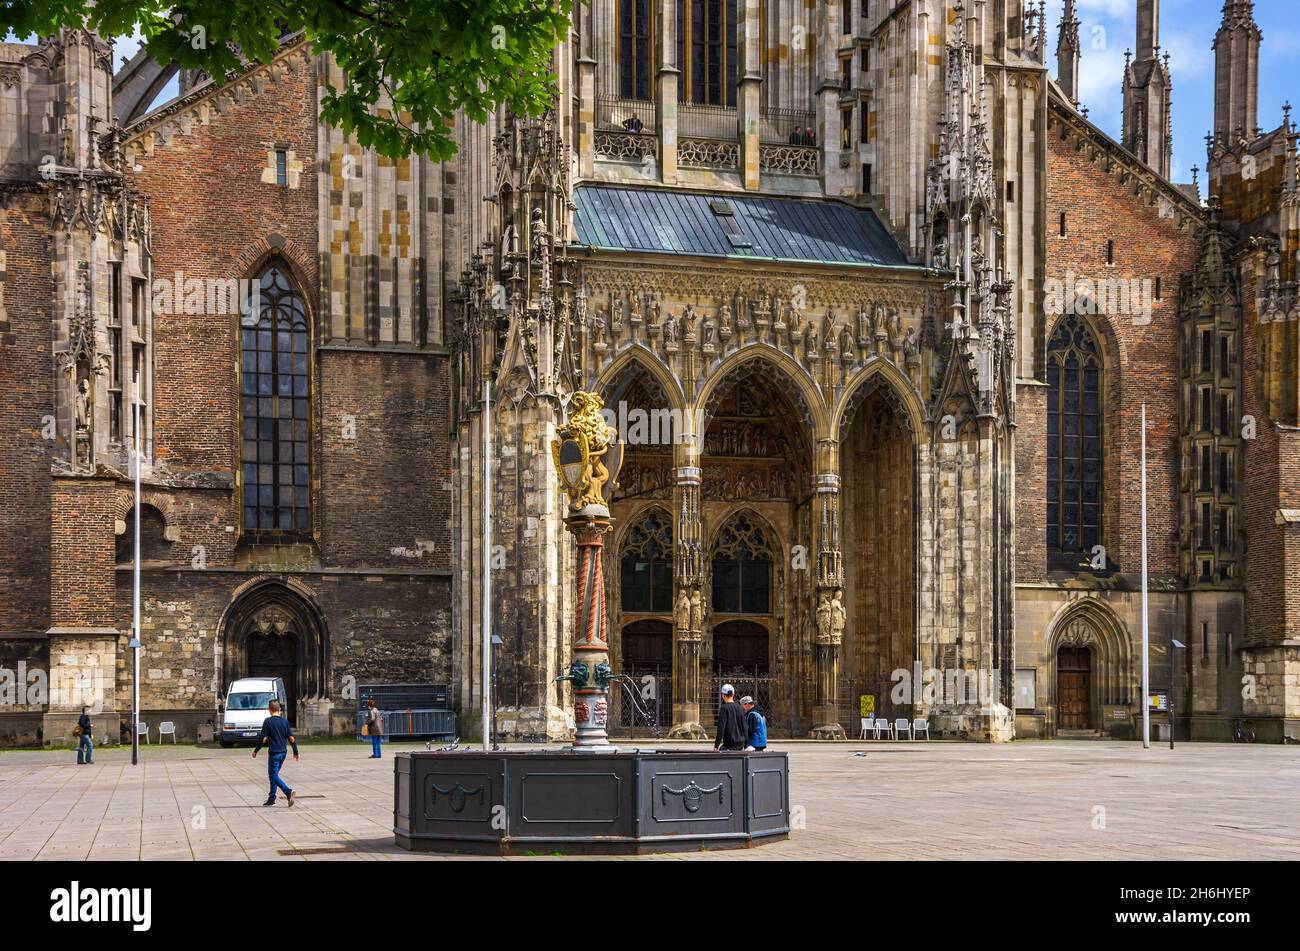 Ulm, Baden-Württemberg, Germany: Western view of the world-famous Minster, as well as the Lions' Fountain in front of it. Stock Photo